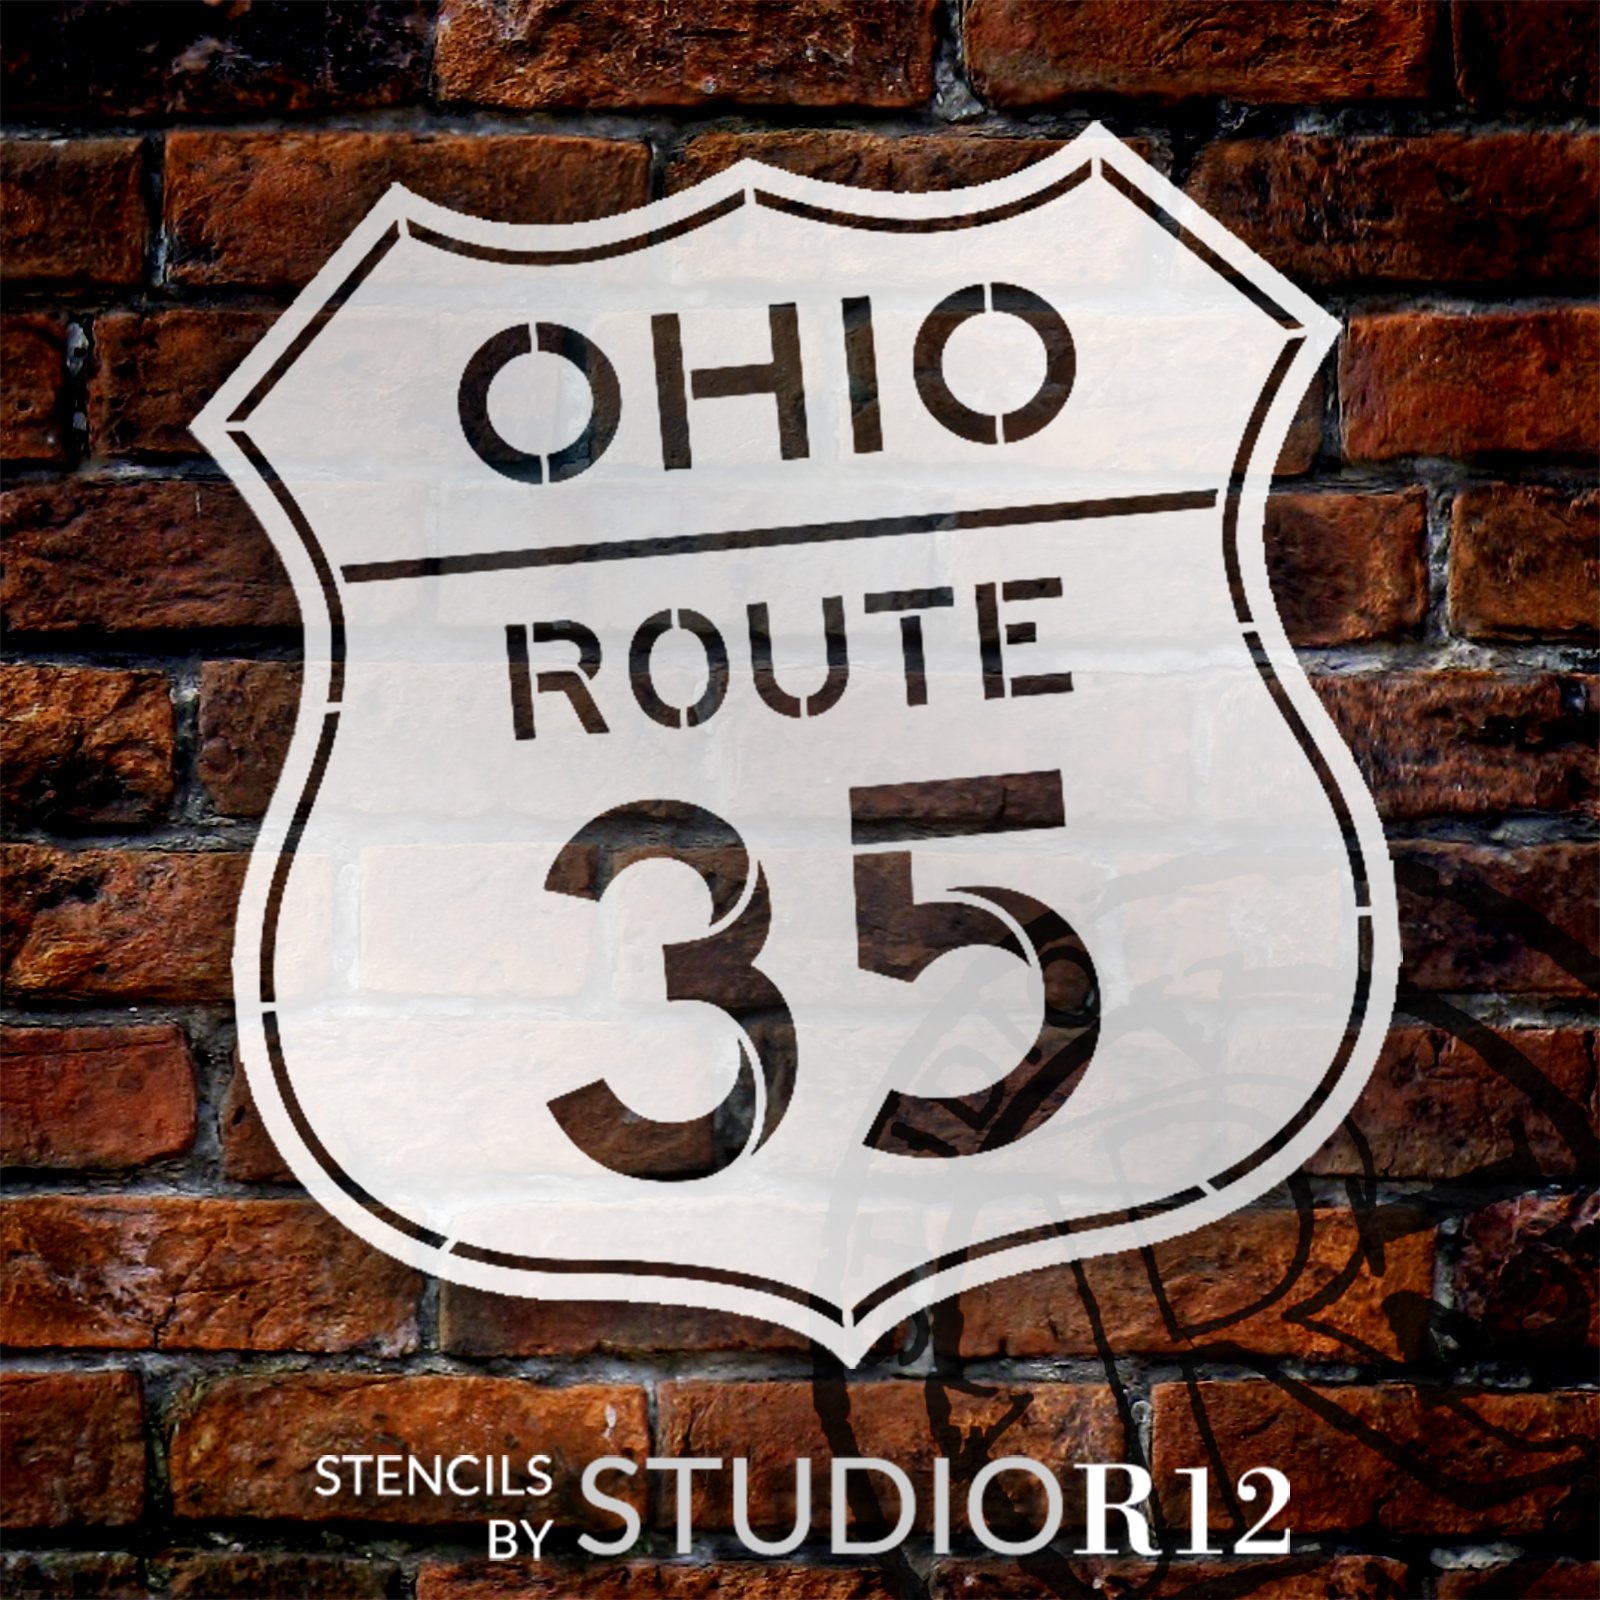 Personalized Route 66 Sign Stencil by StudioR12 - Select Size - USA Made - DIY Vintage Highway Garage Decor | Paint Rustic Road Signs for Man Cave